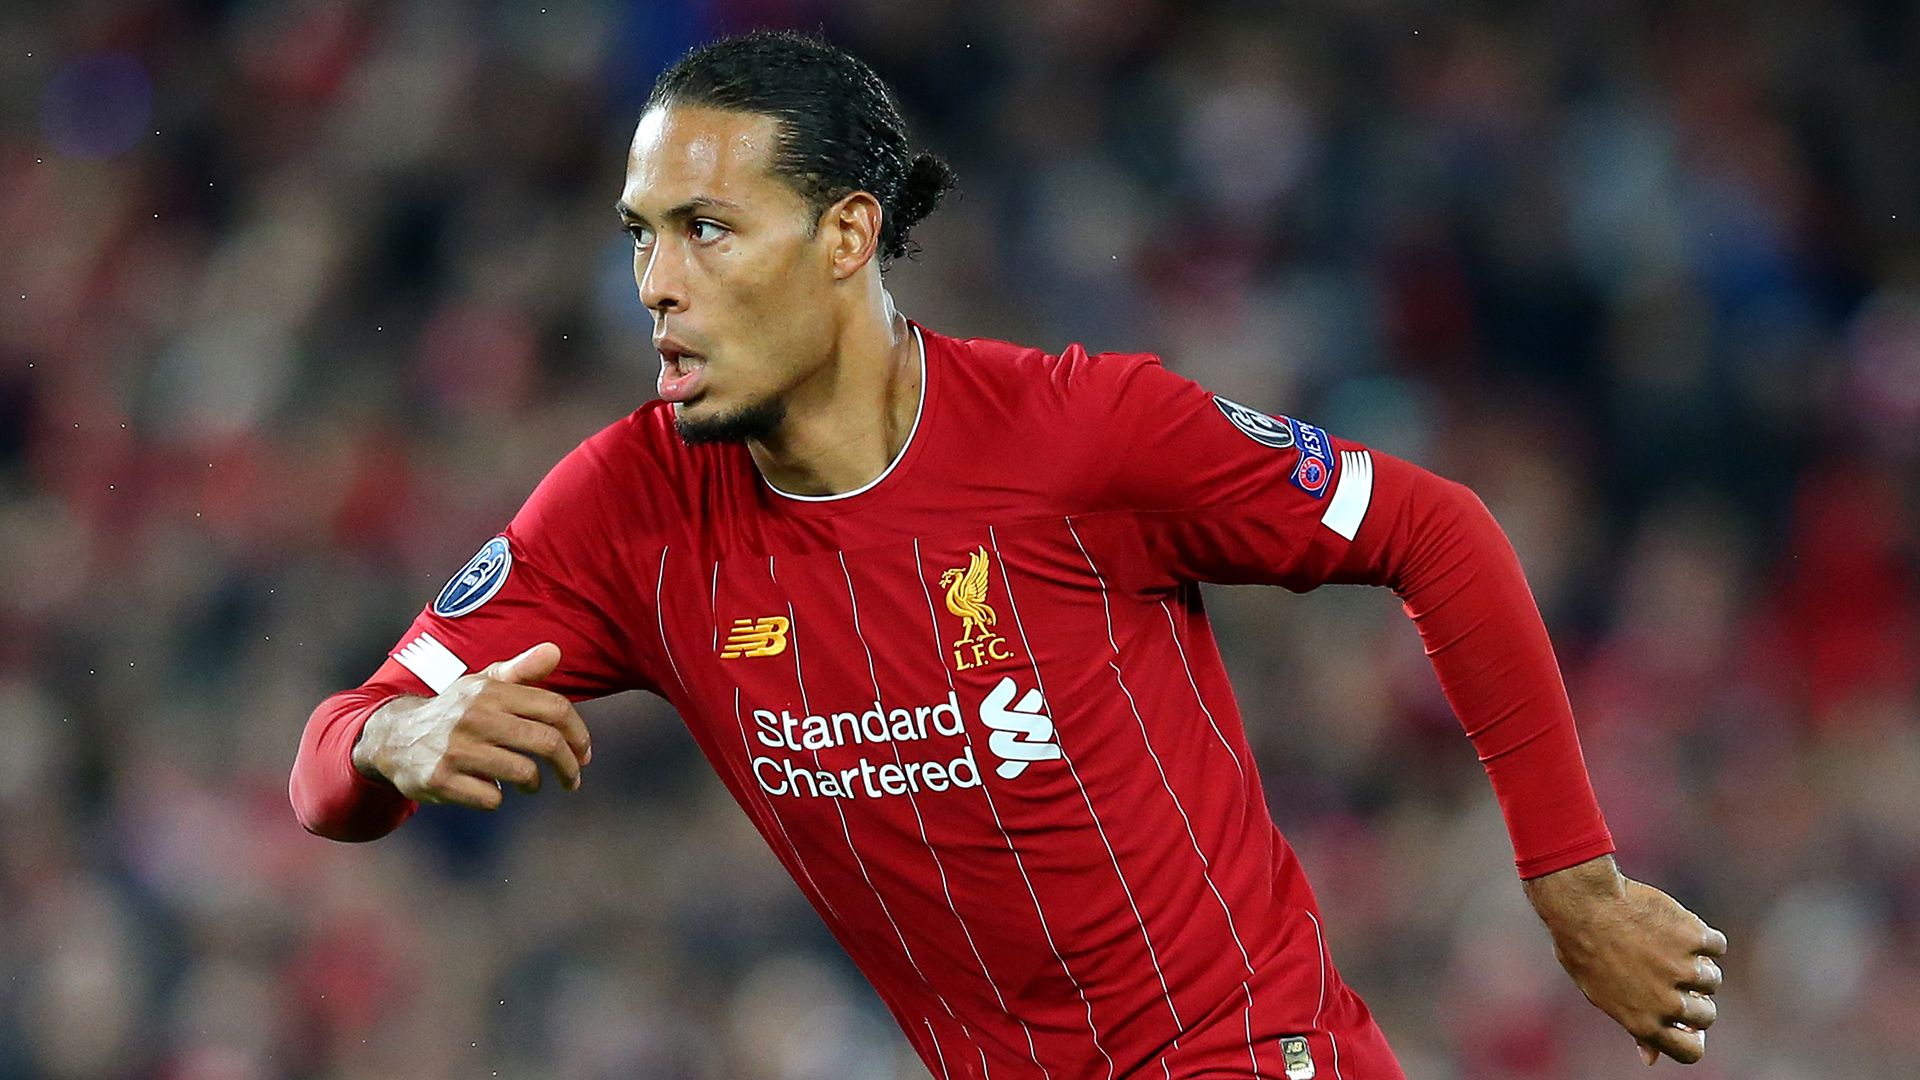 Baresi praise for Van Dijk like being crowned by the king!